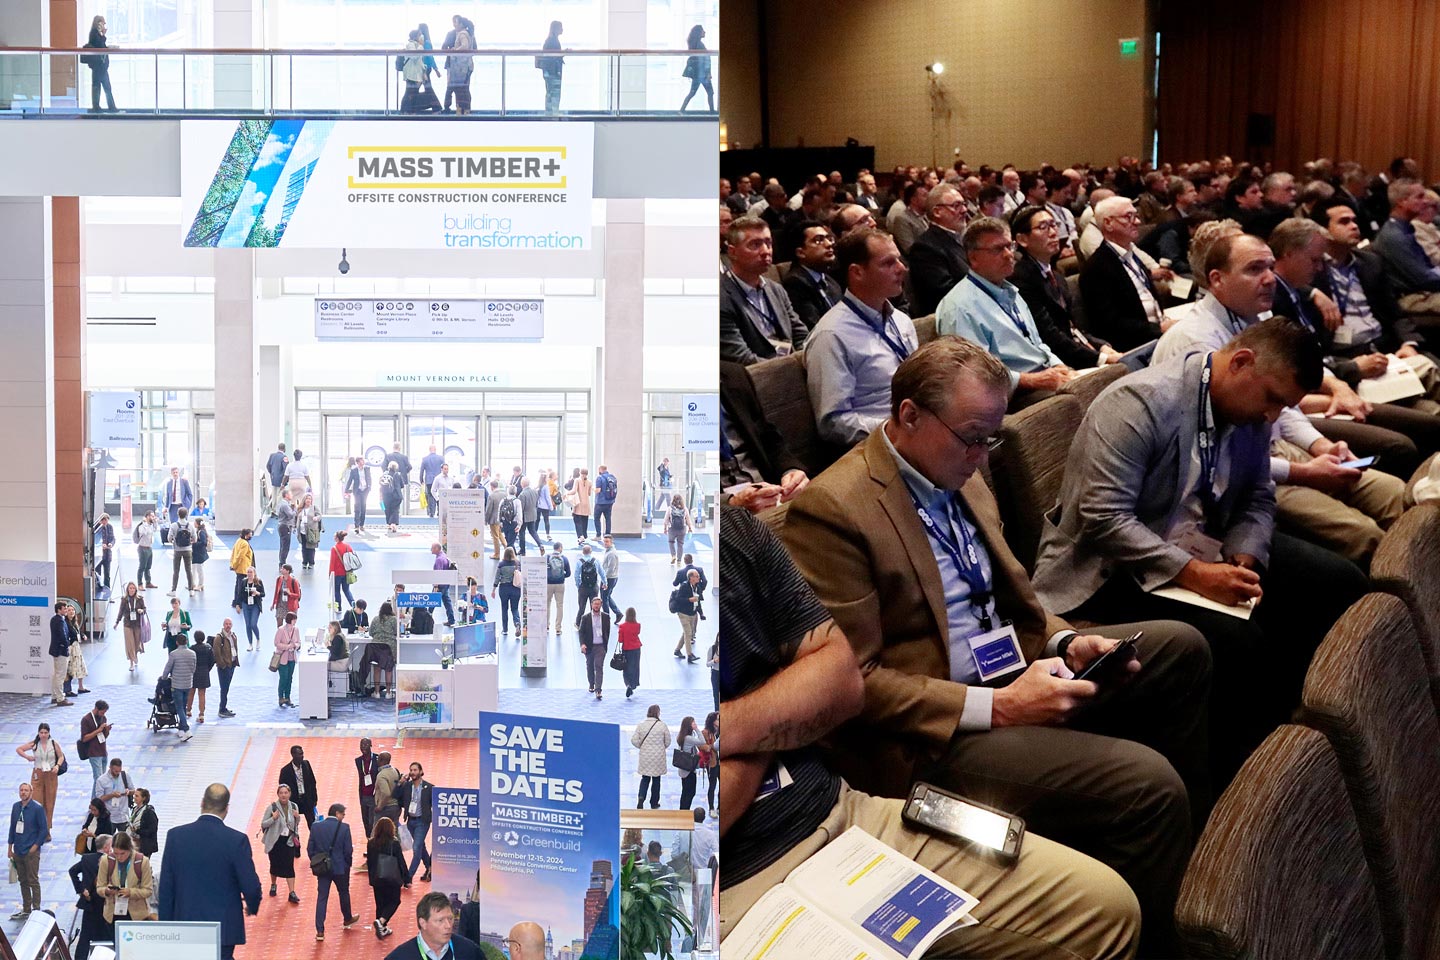 Mass Timber+ Wood-Based Construction Conference